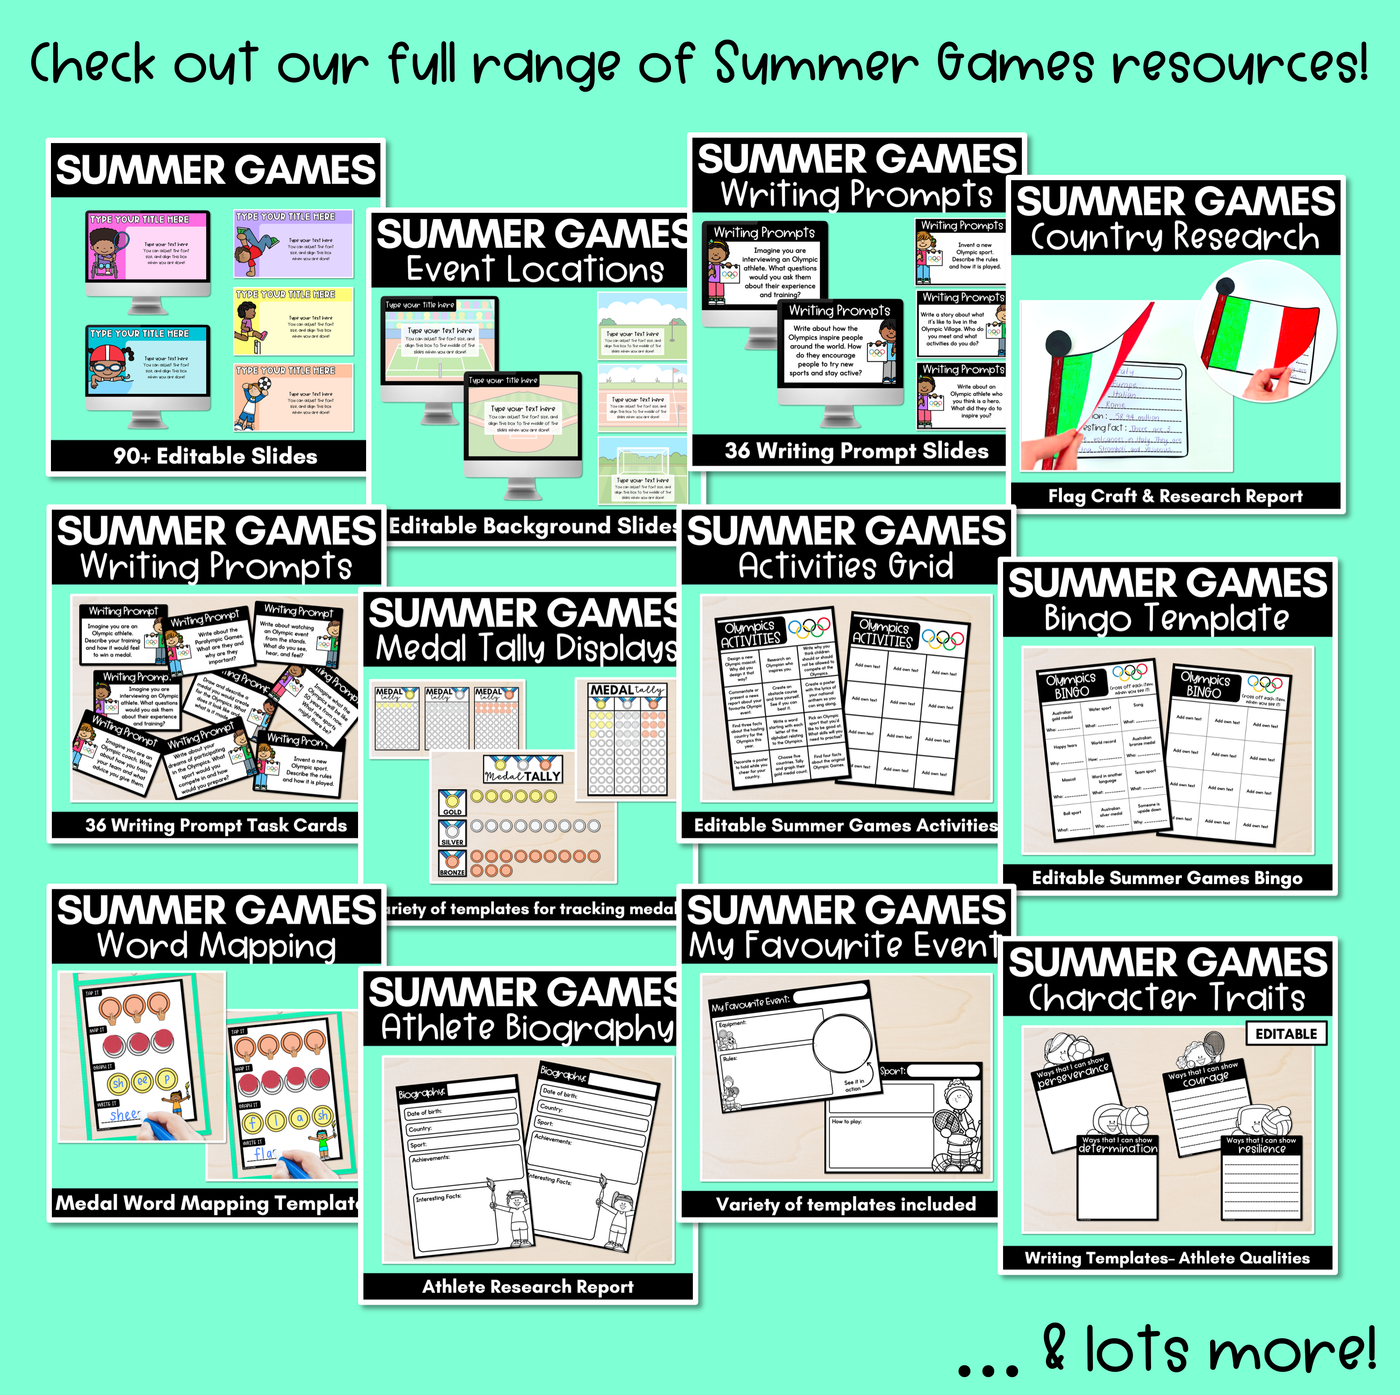 Summer Games Event Locations - Editable Background Slides for Summer Games Activities